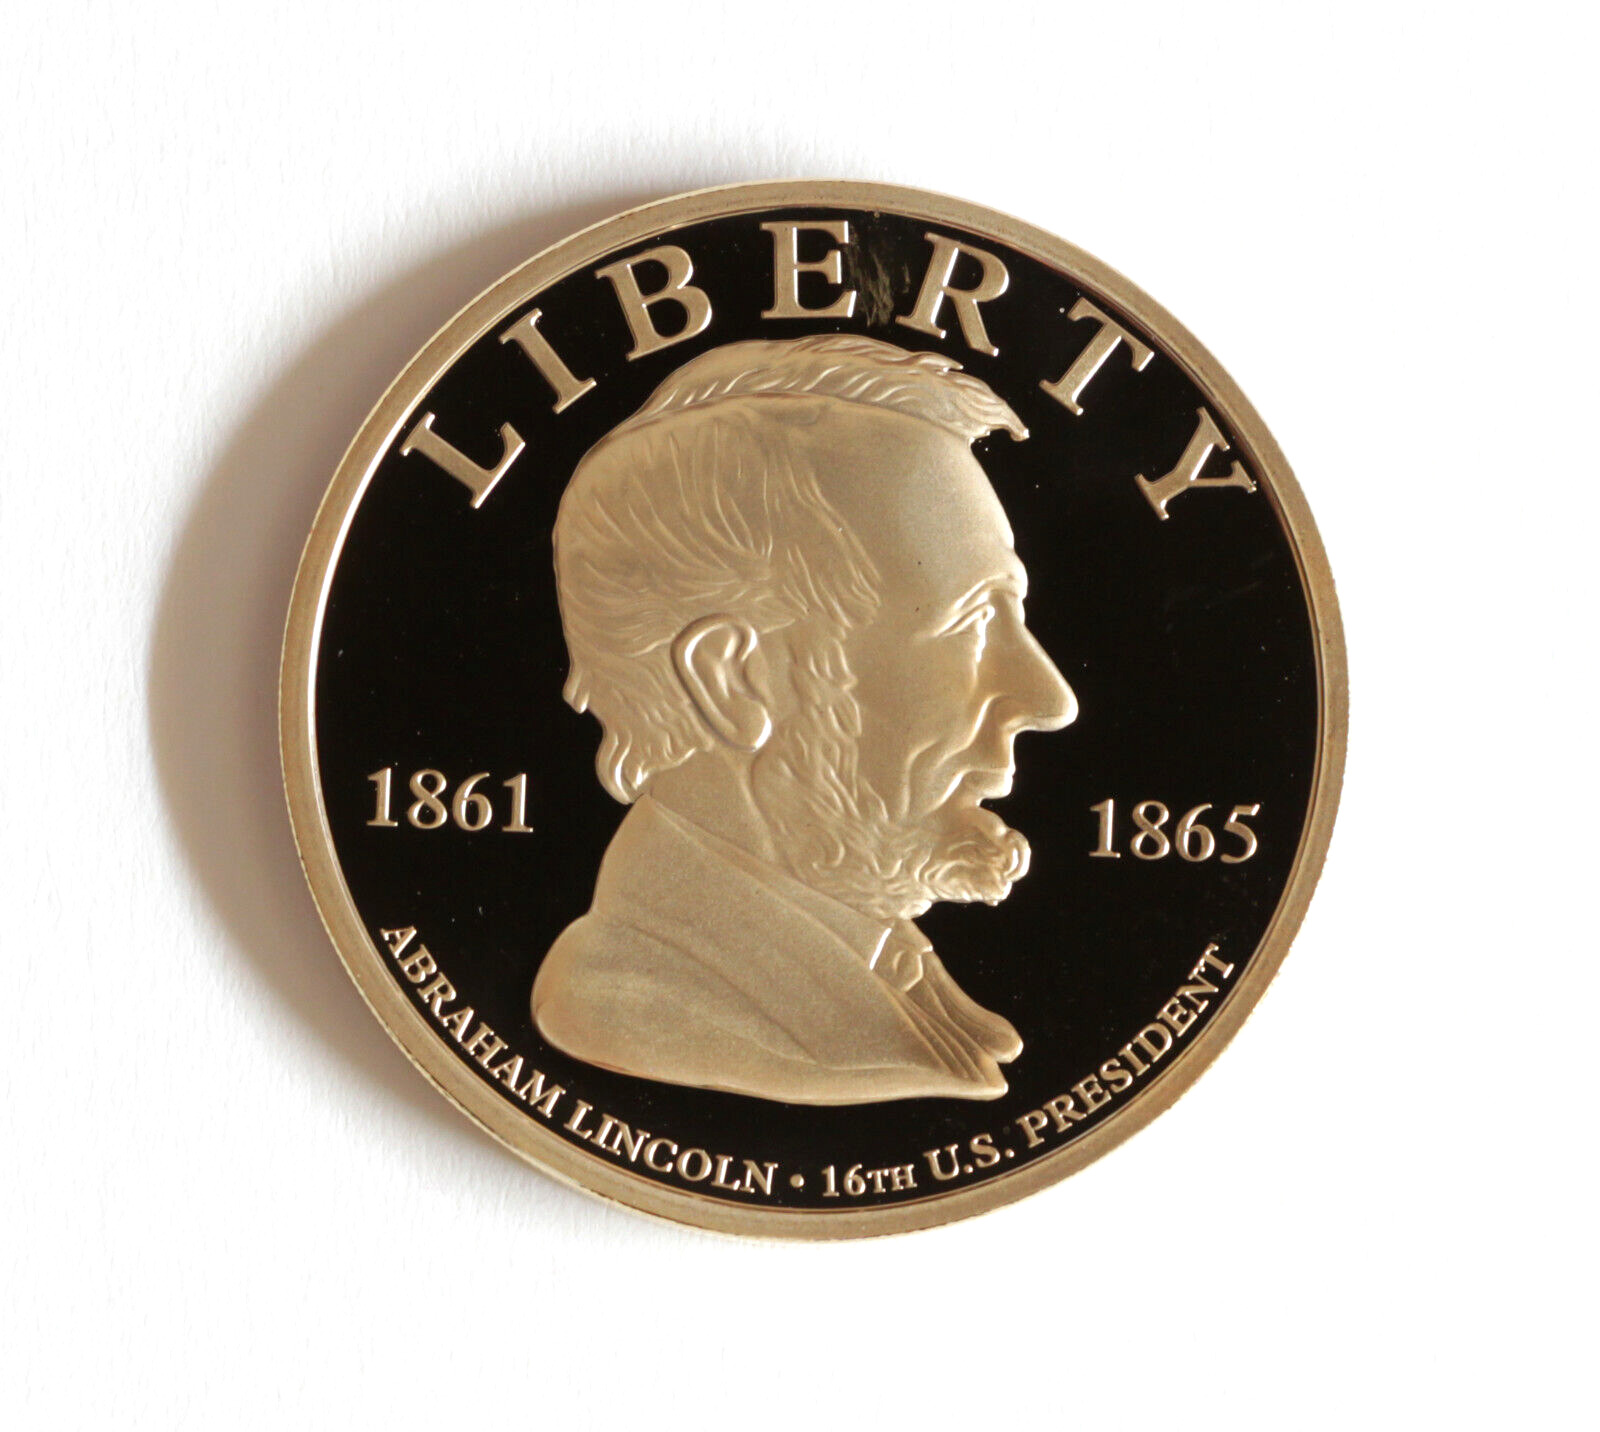 1861-1865 Abraham Lincoln 16th U.S. President Commemorative Liberty Proof Coin